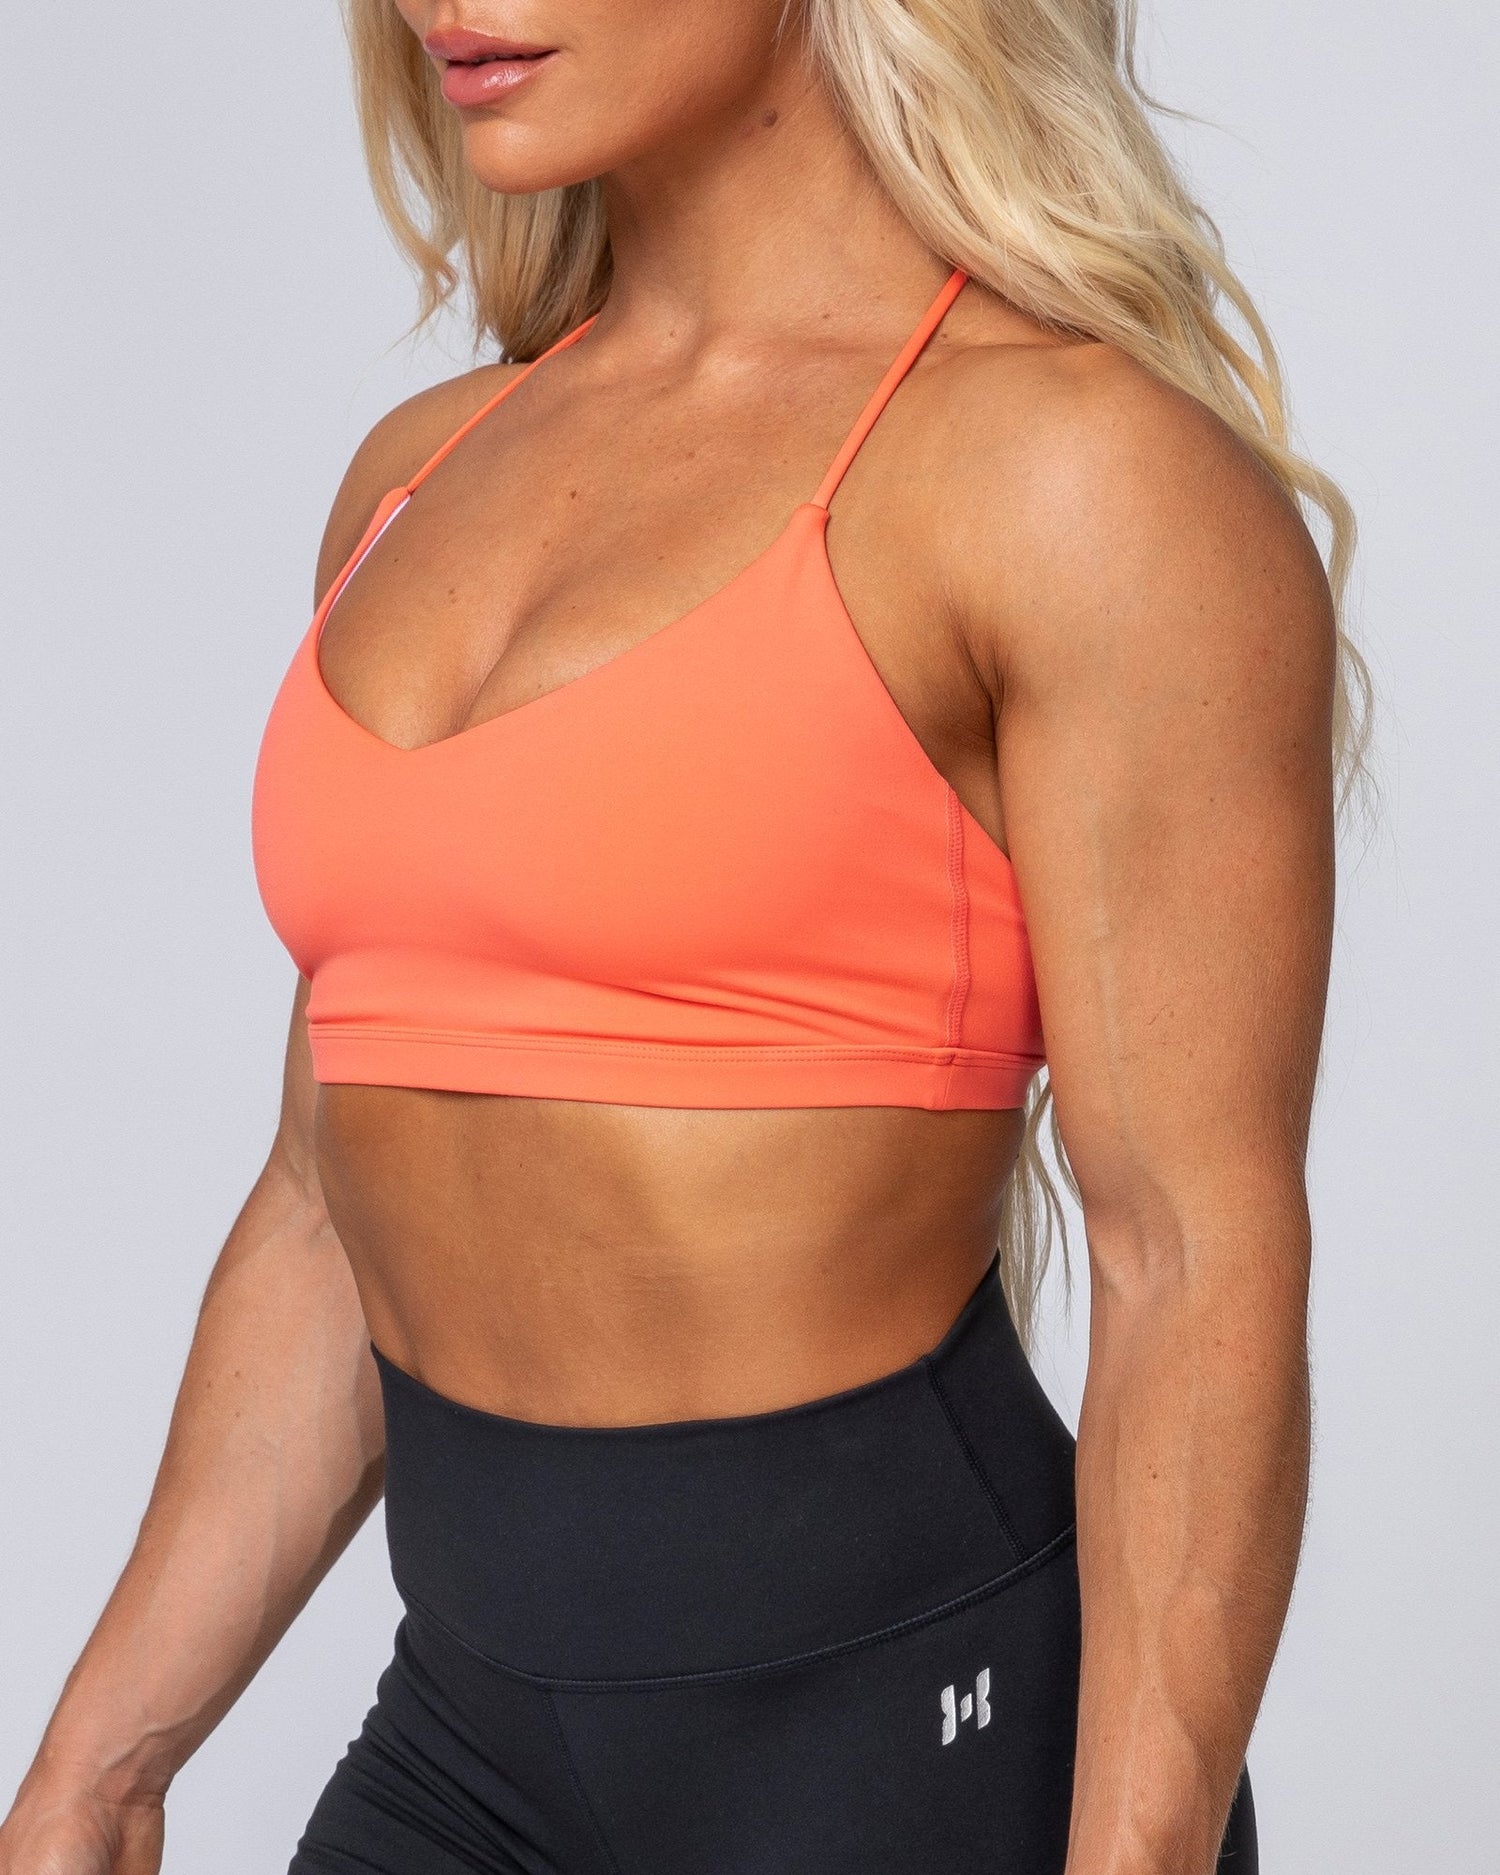 Gym clothes women, Muscle Nation, Clothes gym, Activewear for women, Gym clothes for women, Australian Activewear, Australian Activewear brands, Gym crop top, Sports bra